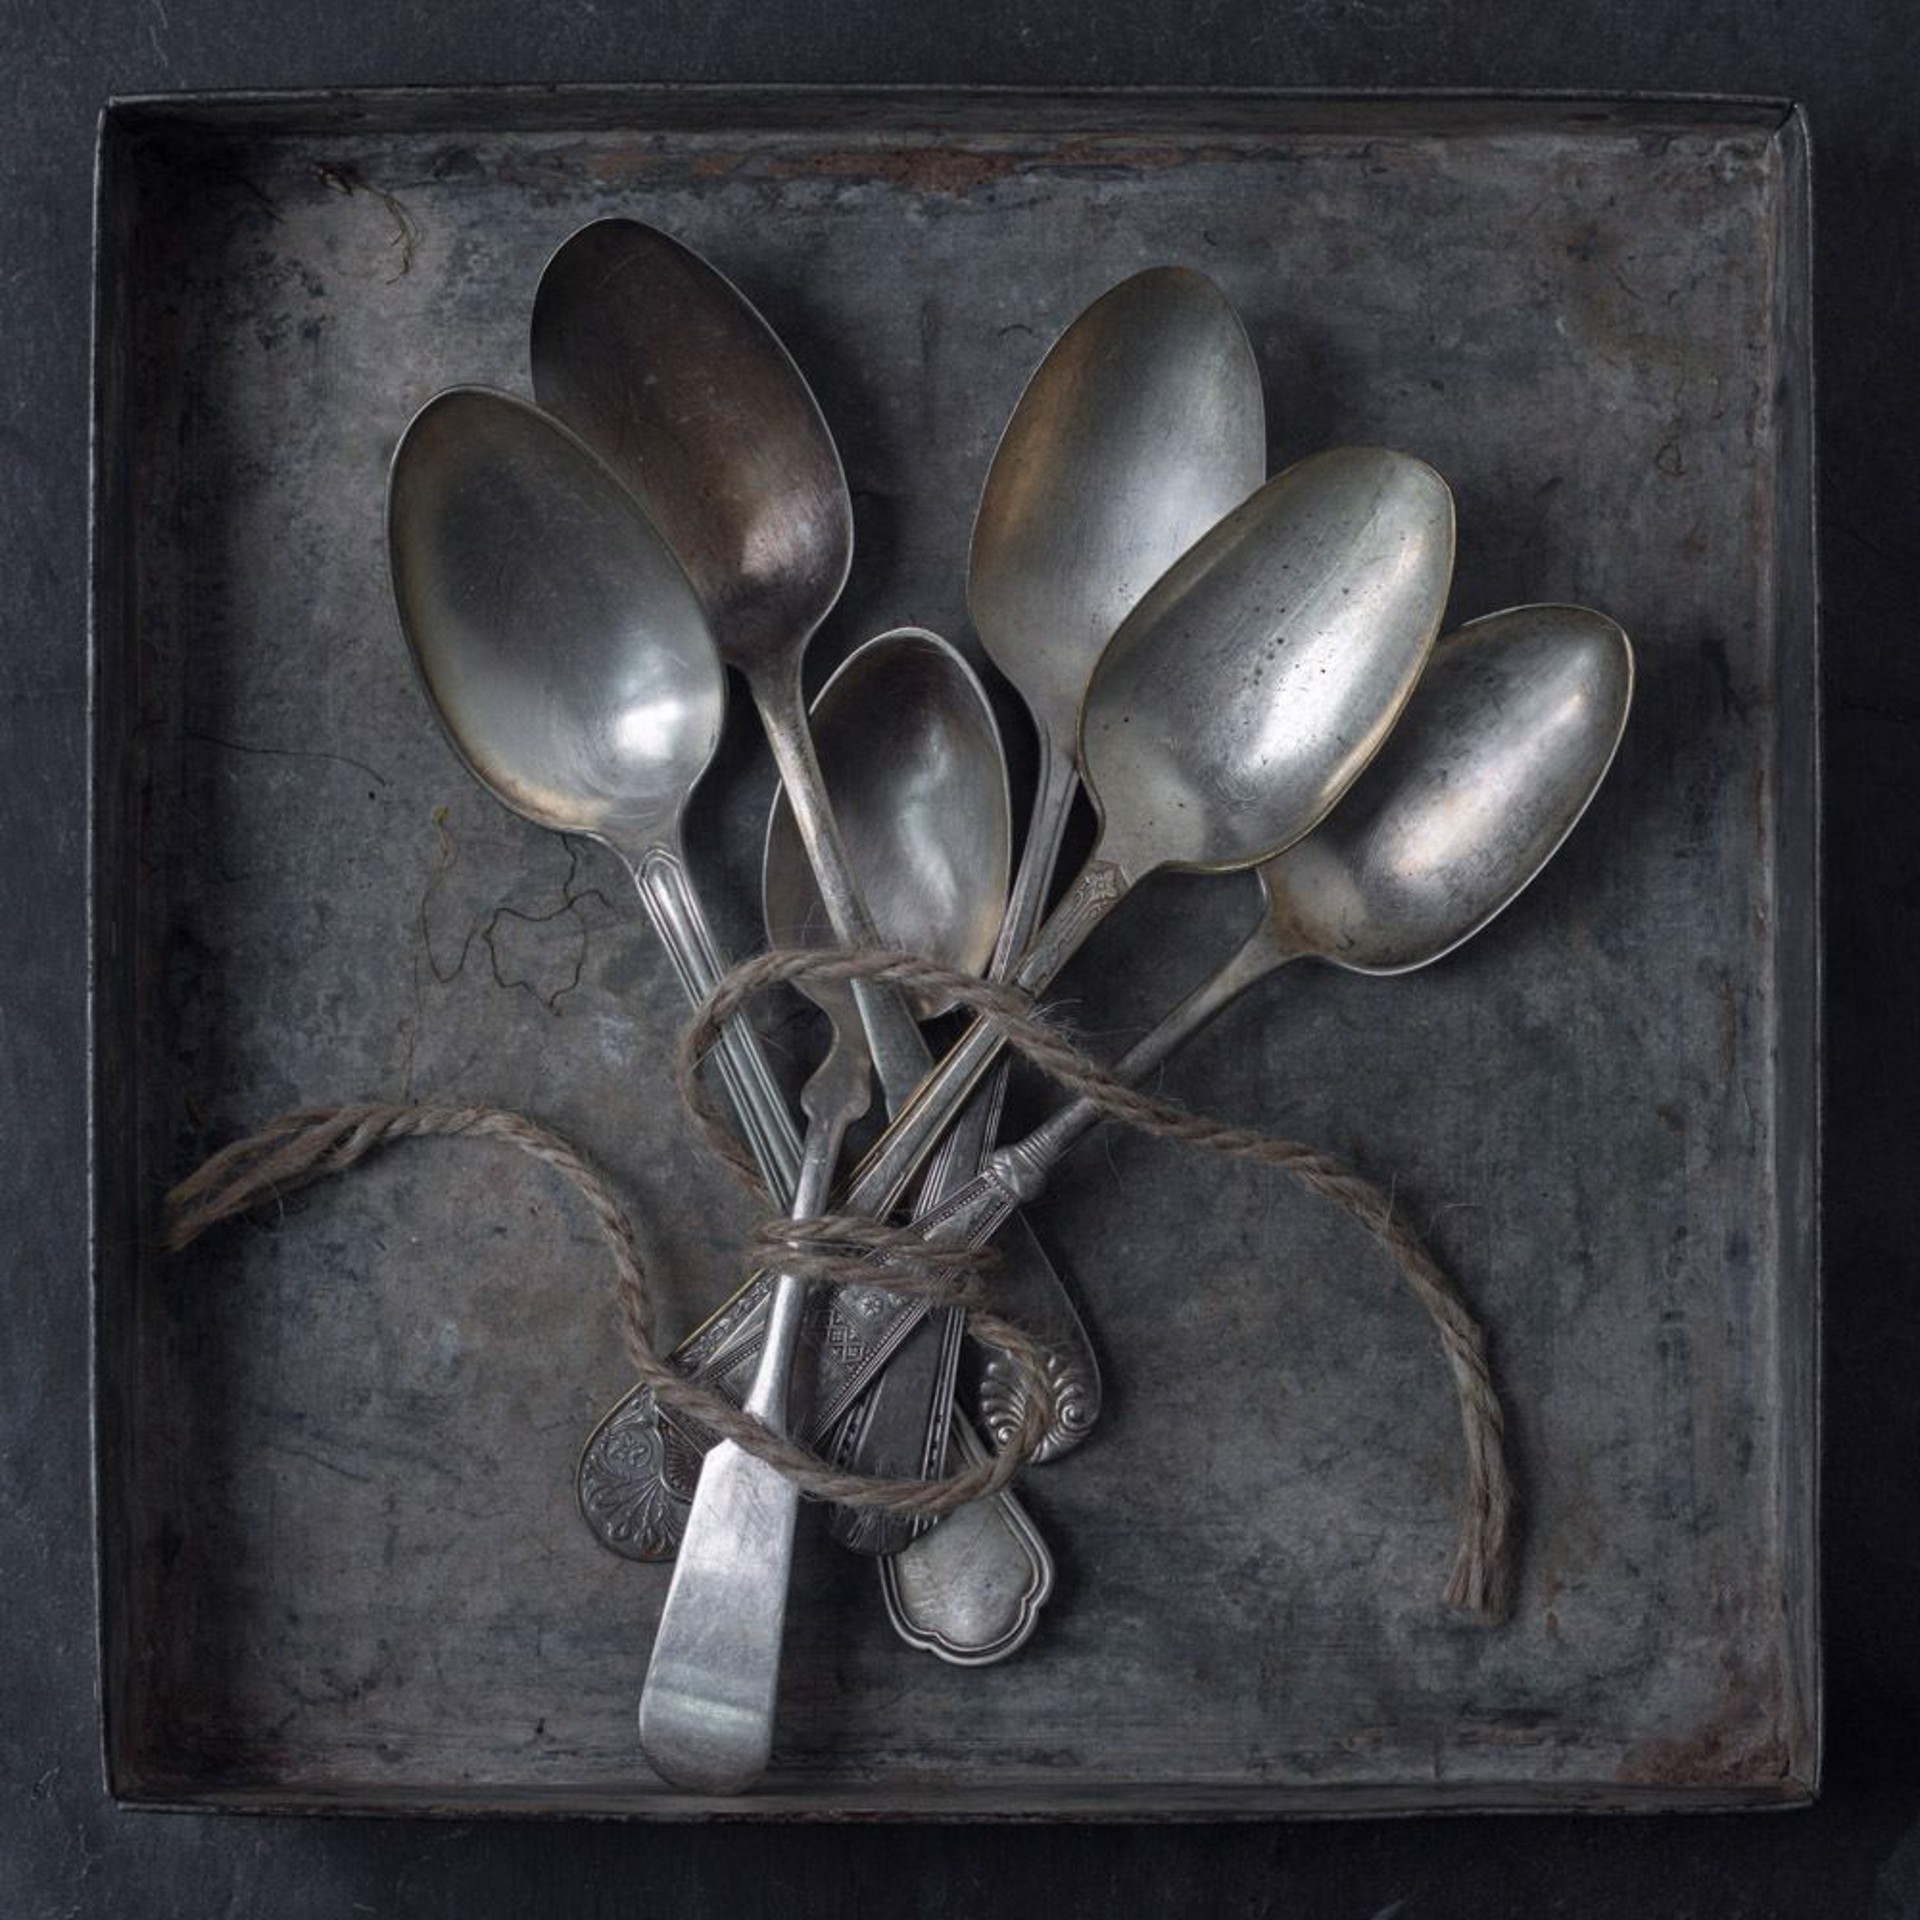 Spoons and Twine in Tray by Lynn Karlin